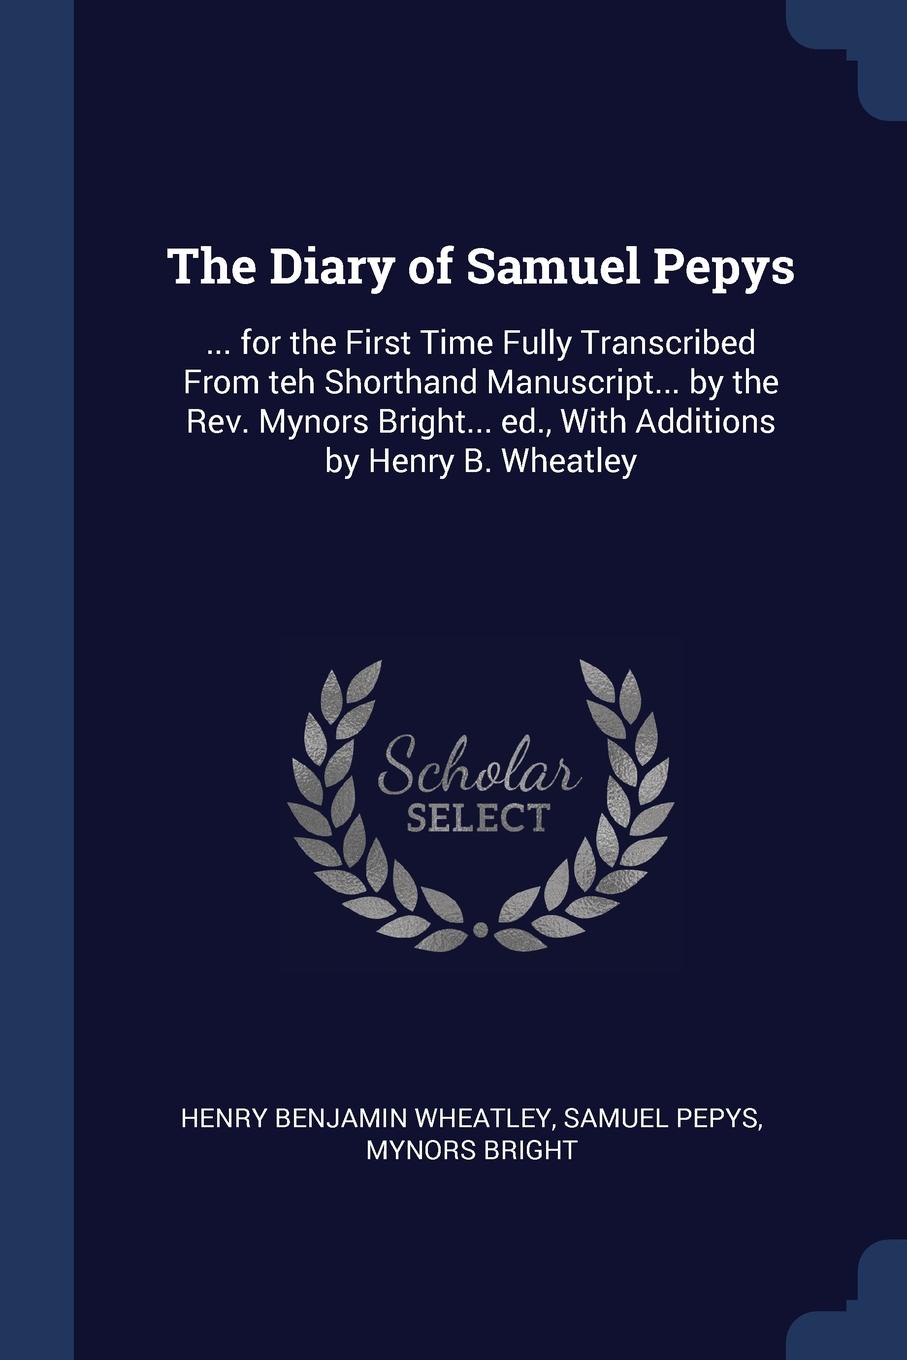 The Diary of Samuel Pepys. ... for the First Time Fully Transcribed From teh Shorthand Manuscript... by the Rev. Mynors Bright... ed., With Additions by Henry B. Wheatley